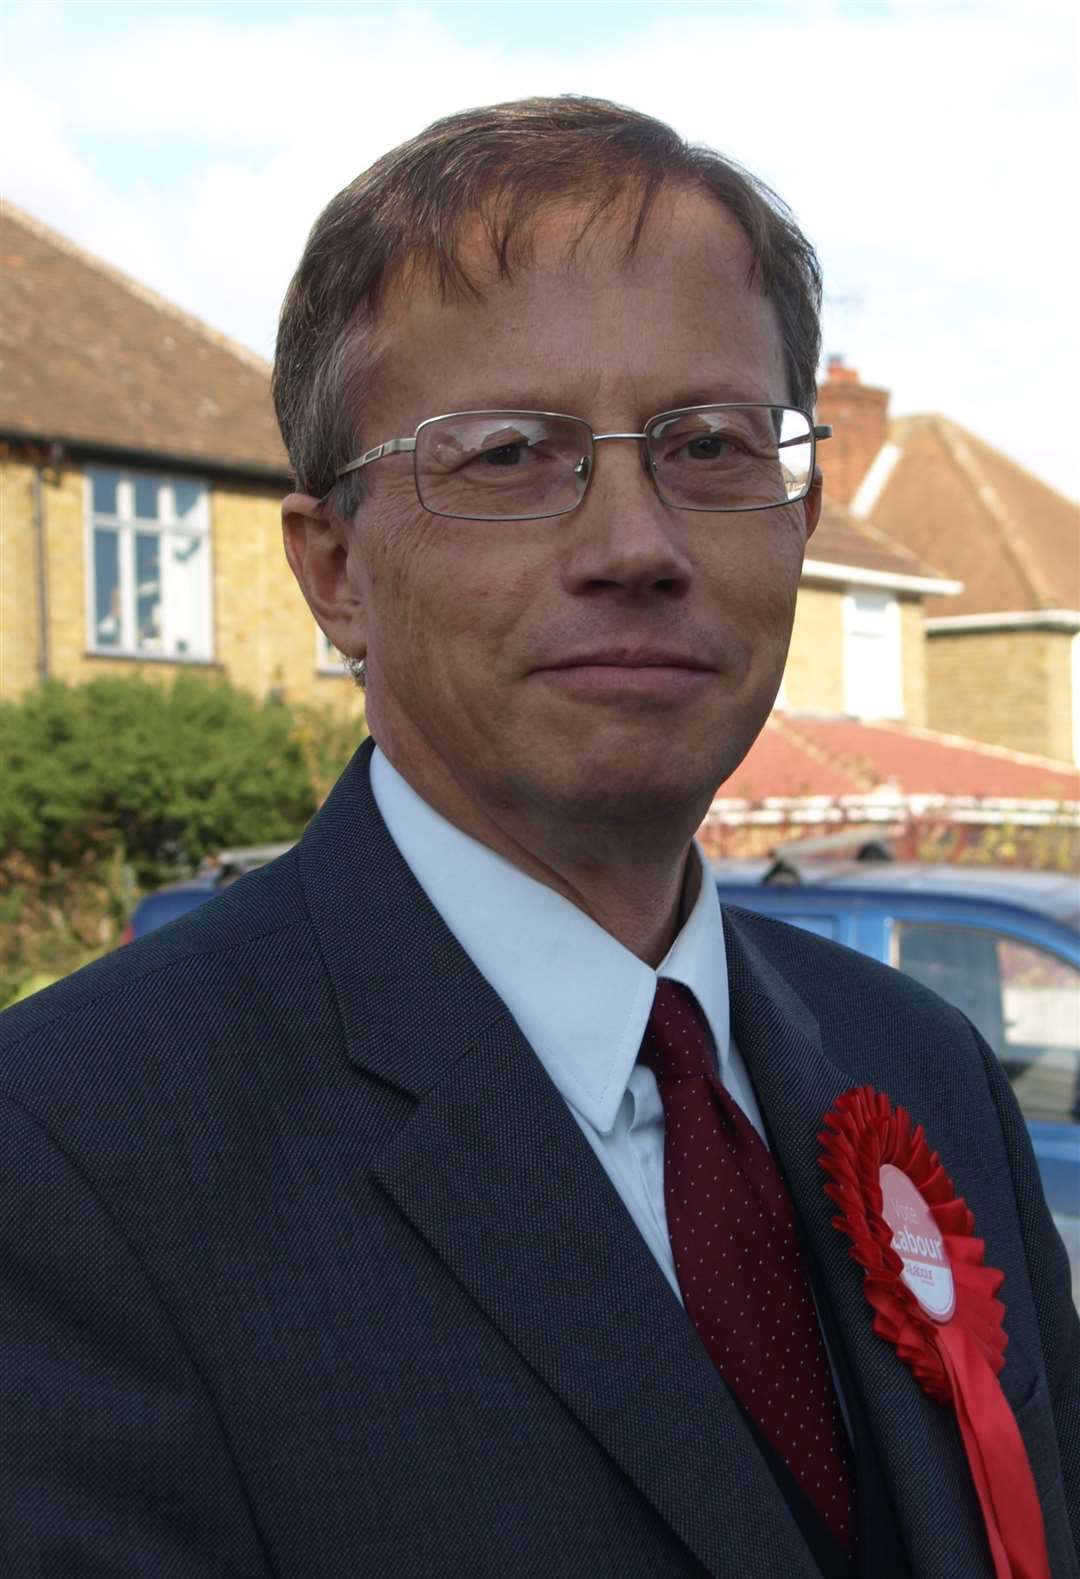 Medway Cllr Cllive Johnson standing for Labour in Sittingbourne and Sheppey 2019 (21183598)